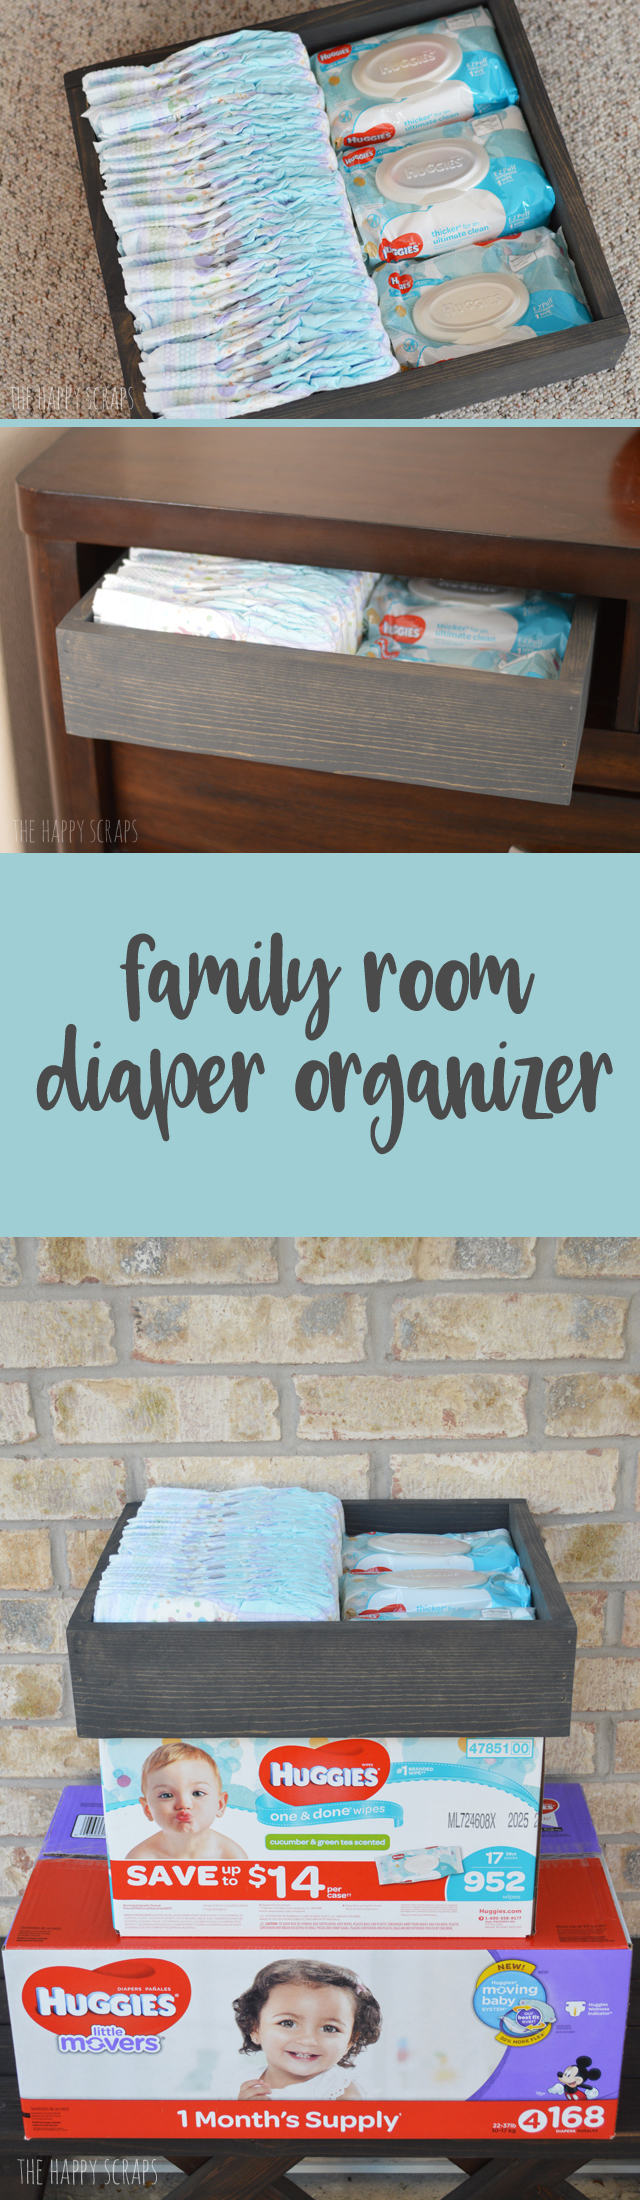 With a little one, it's nice to have diapers in more than one room. We keep some diapers in the family room, so I created this Family Room Diaper Organizer. 